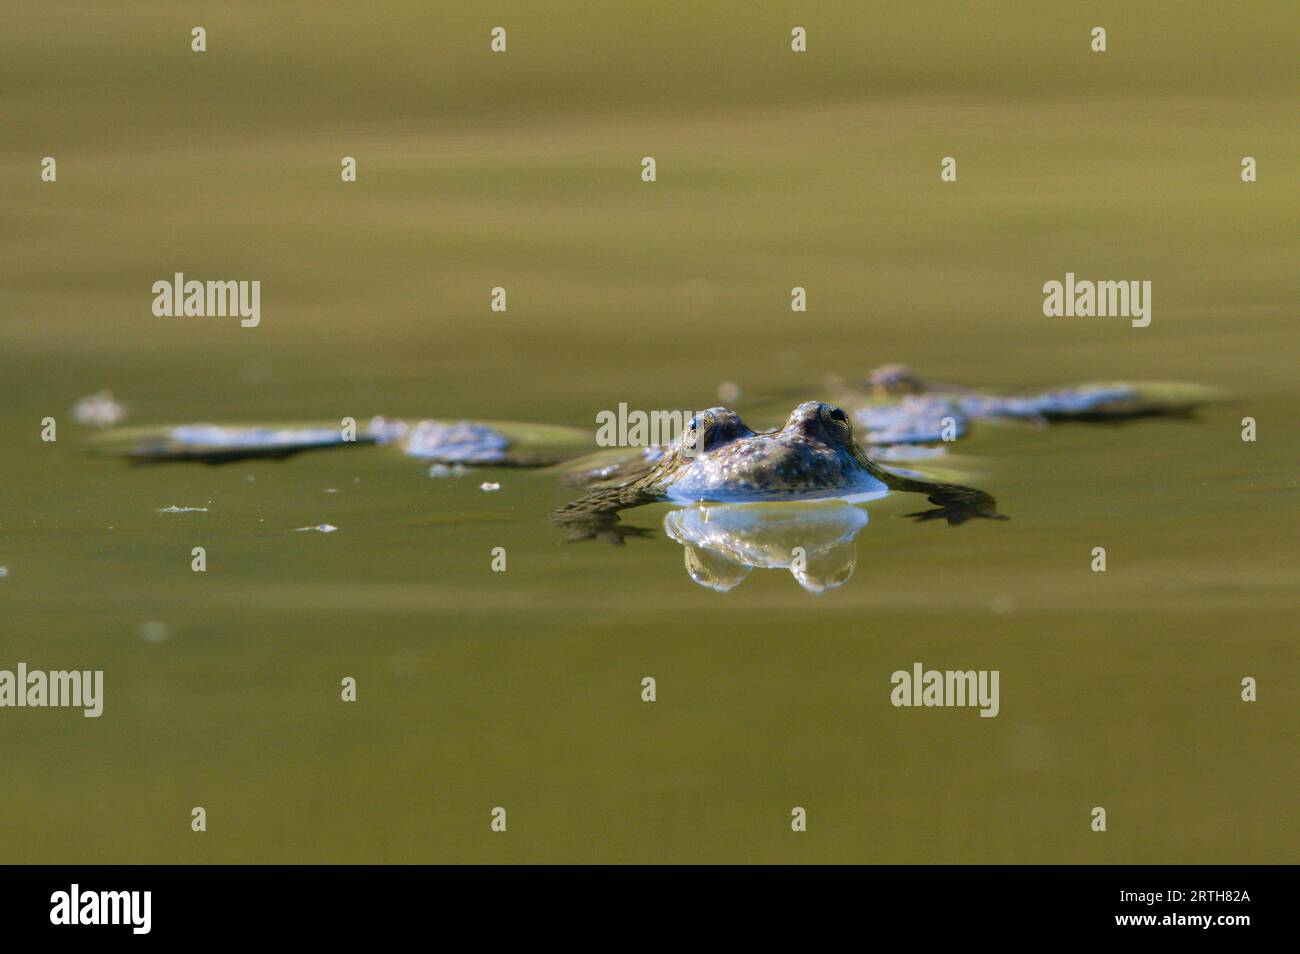 Bombina Variegata aka yellow-bellied toads is swimming on the pond surface. Face to face meeting. Threatened species of amphibian in Czech republic. V Stock Photo